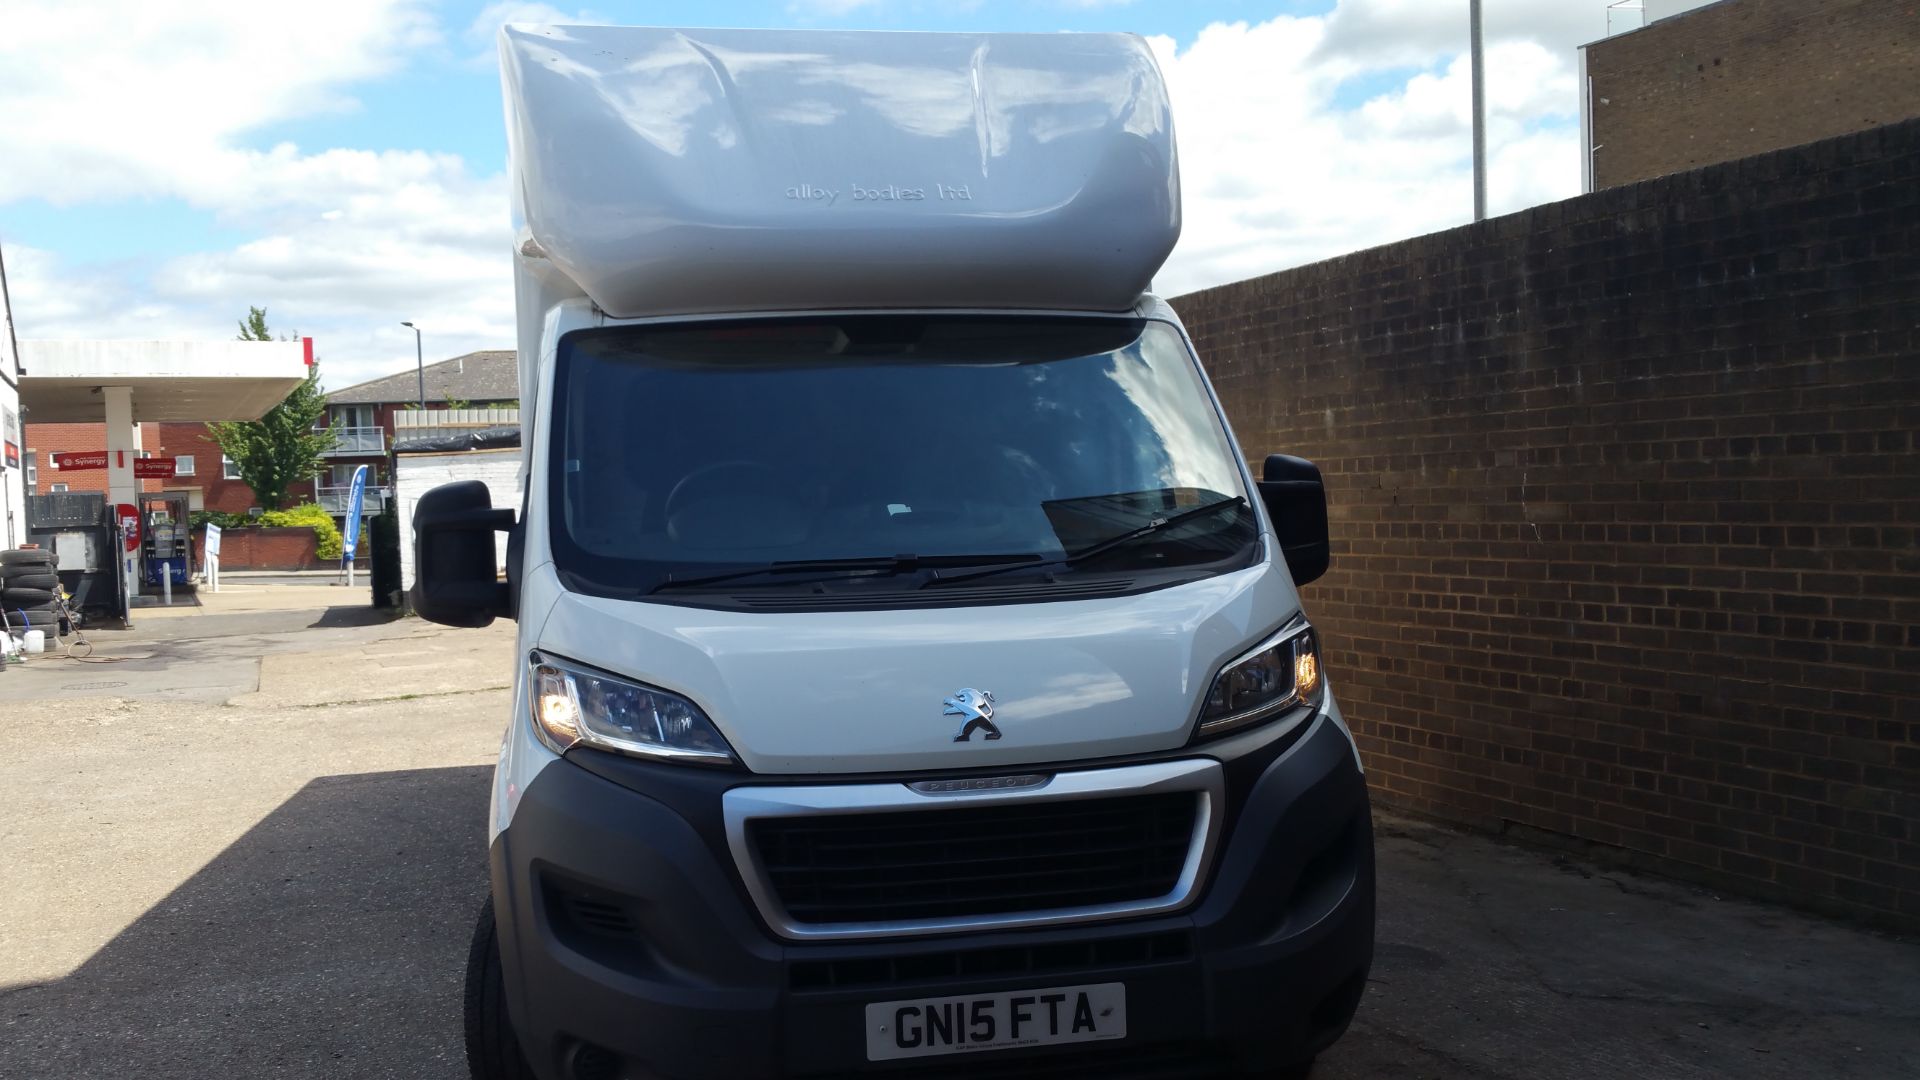 * 2015 Peugeot Boxer 335 HDI 3.5 tonne Luton Van with 500Kg Tail Lift and Aircon, Reg GN15 FTA, - Image 3 of 9